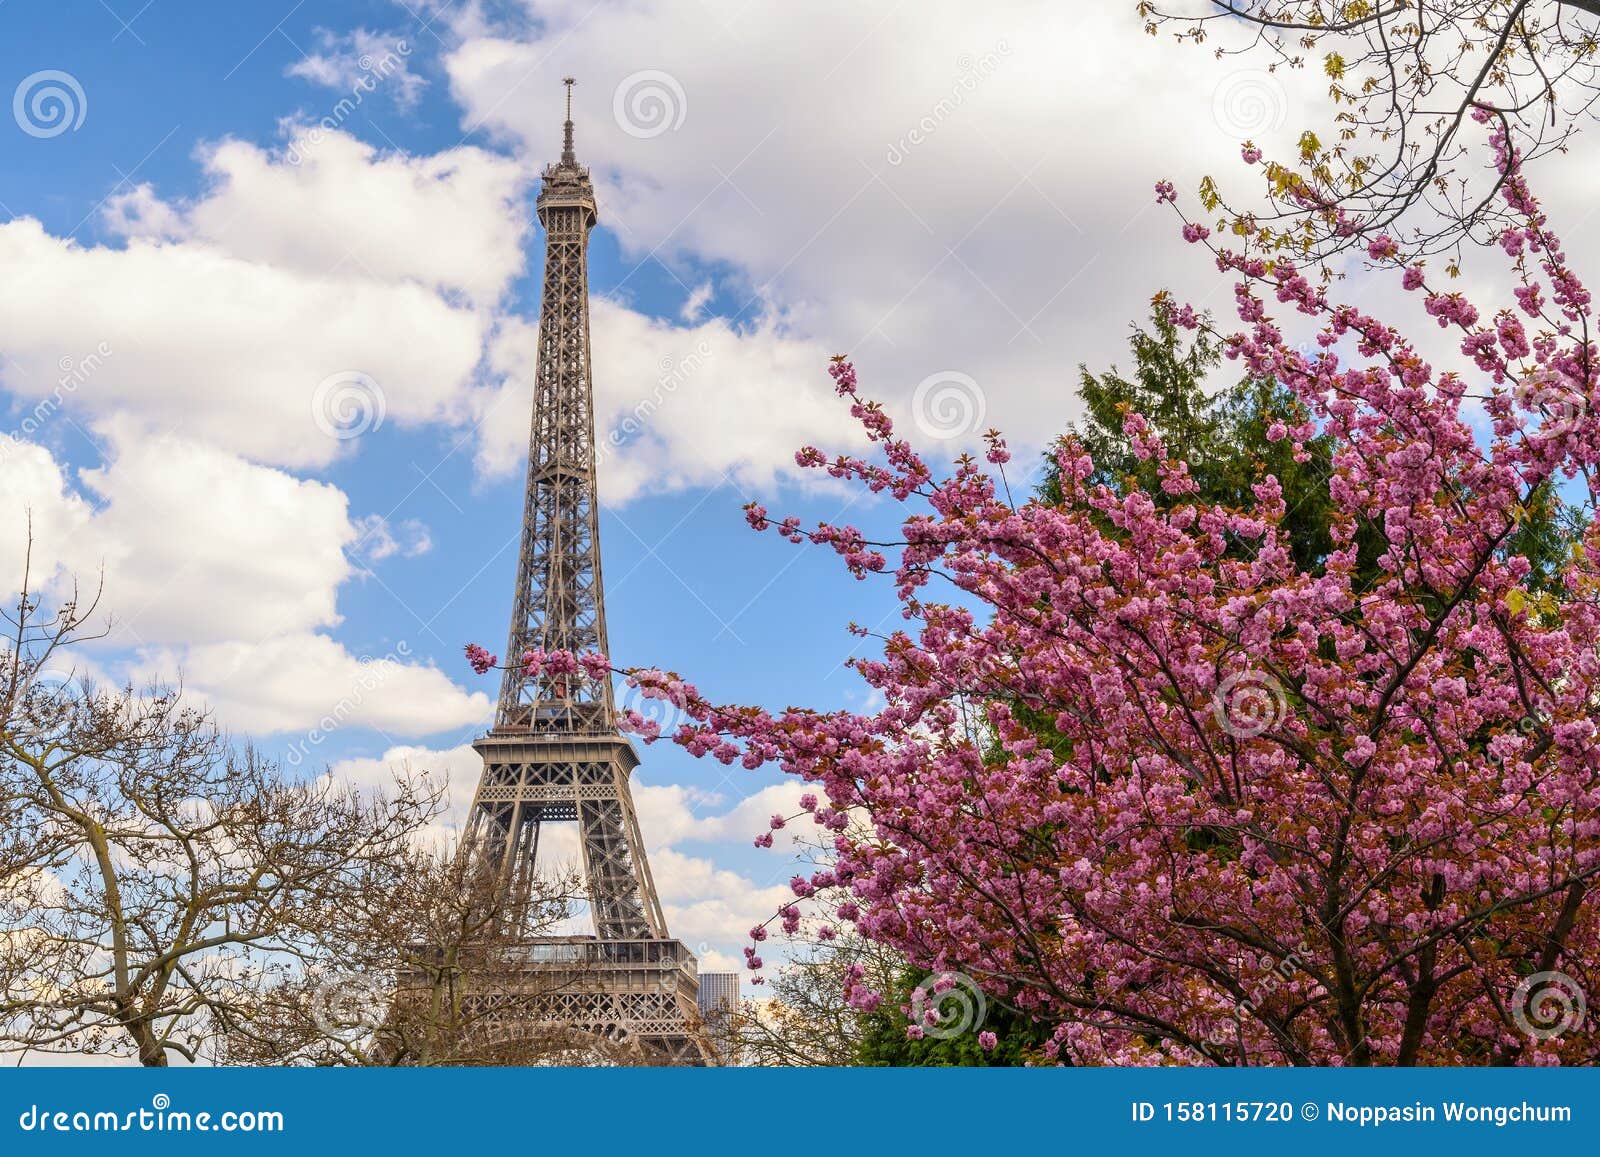 Paris France At Eiffel Tower With Spring Cherry Blossom Stock Photo